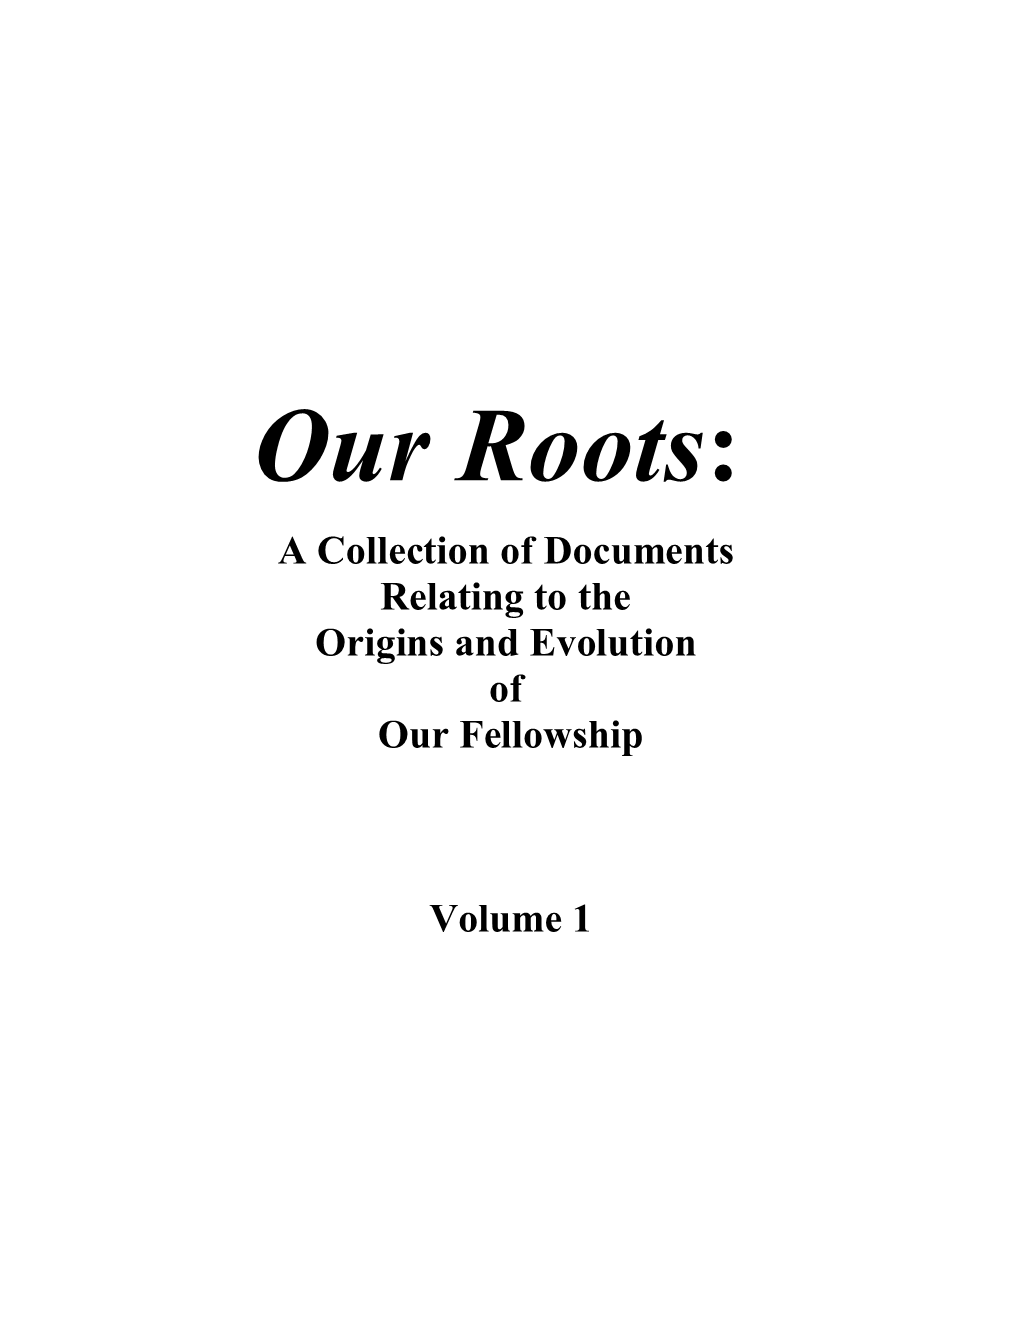 Our Roots: a Collection of Documents Relating to the Origins and Evolution of Our Fellowship